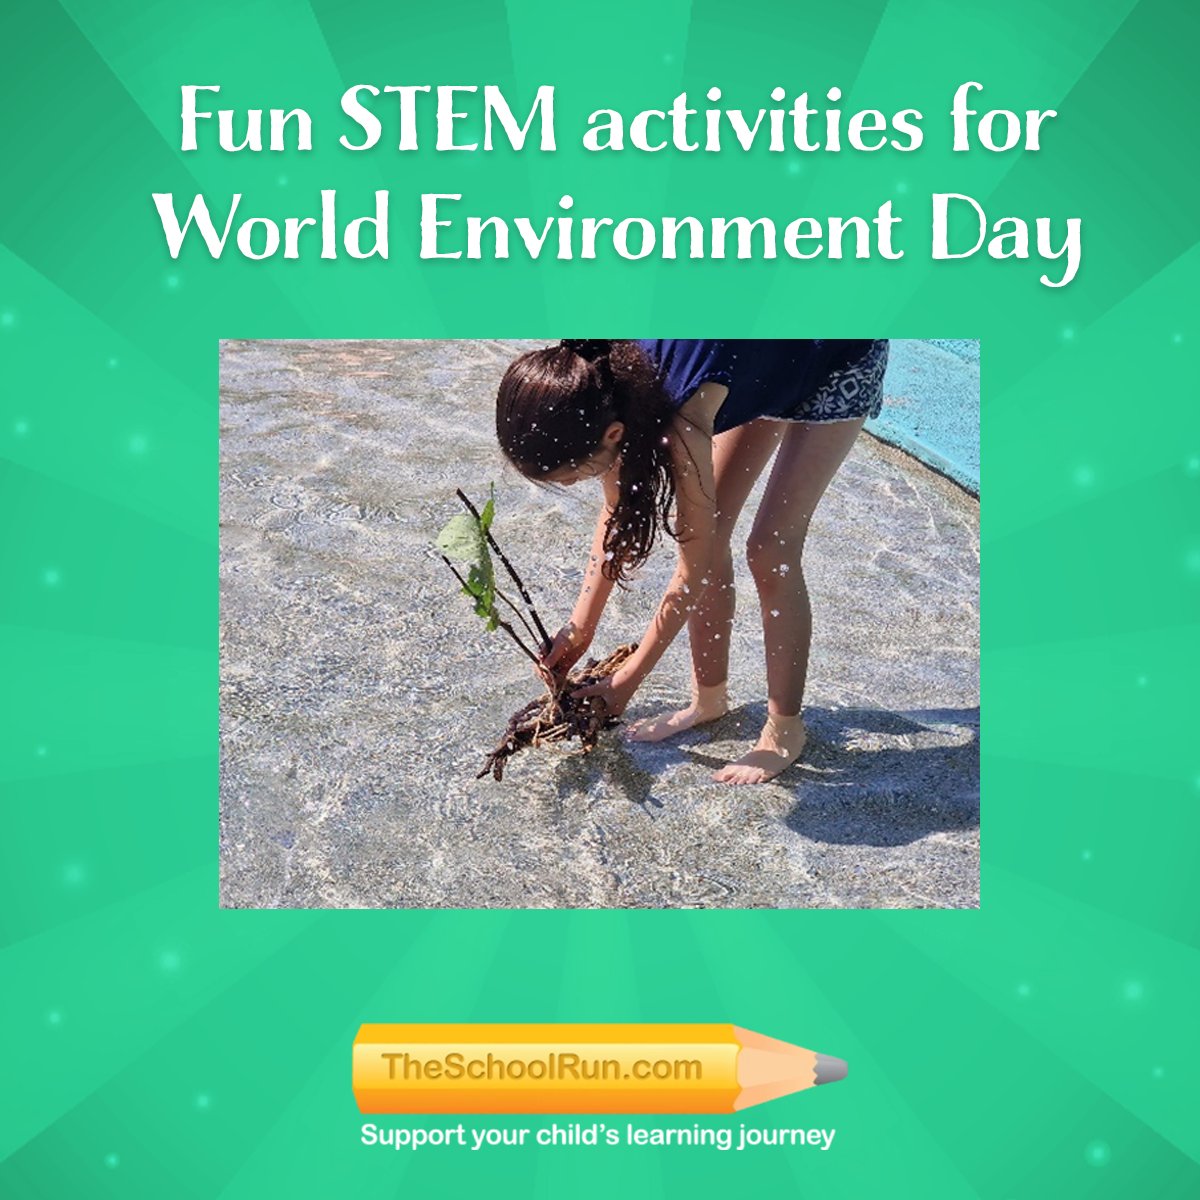 🌎 World Environment Day is just around the corner, and @The_School_Run has a fantastic way for you and your kids to celebrate: dive into some fun STEM activities by @ThomasAMBernard and @lisa_a_moss. Get started now with the step-by-step instructions: bit.ly/4dSio87 🌎